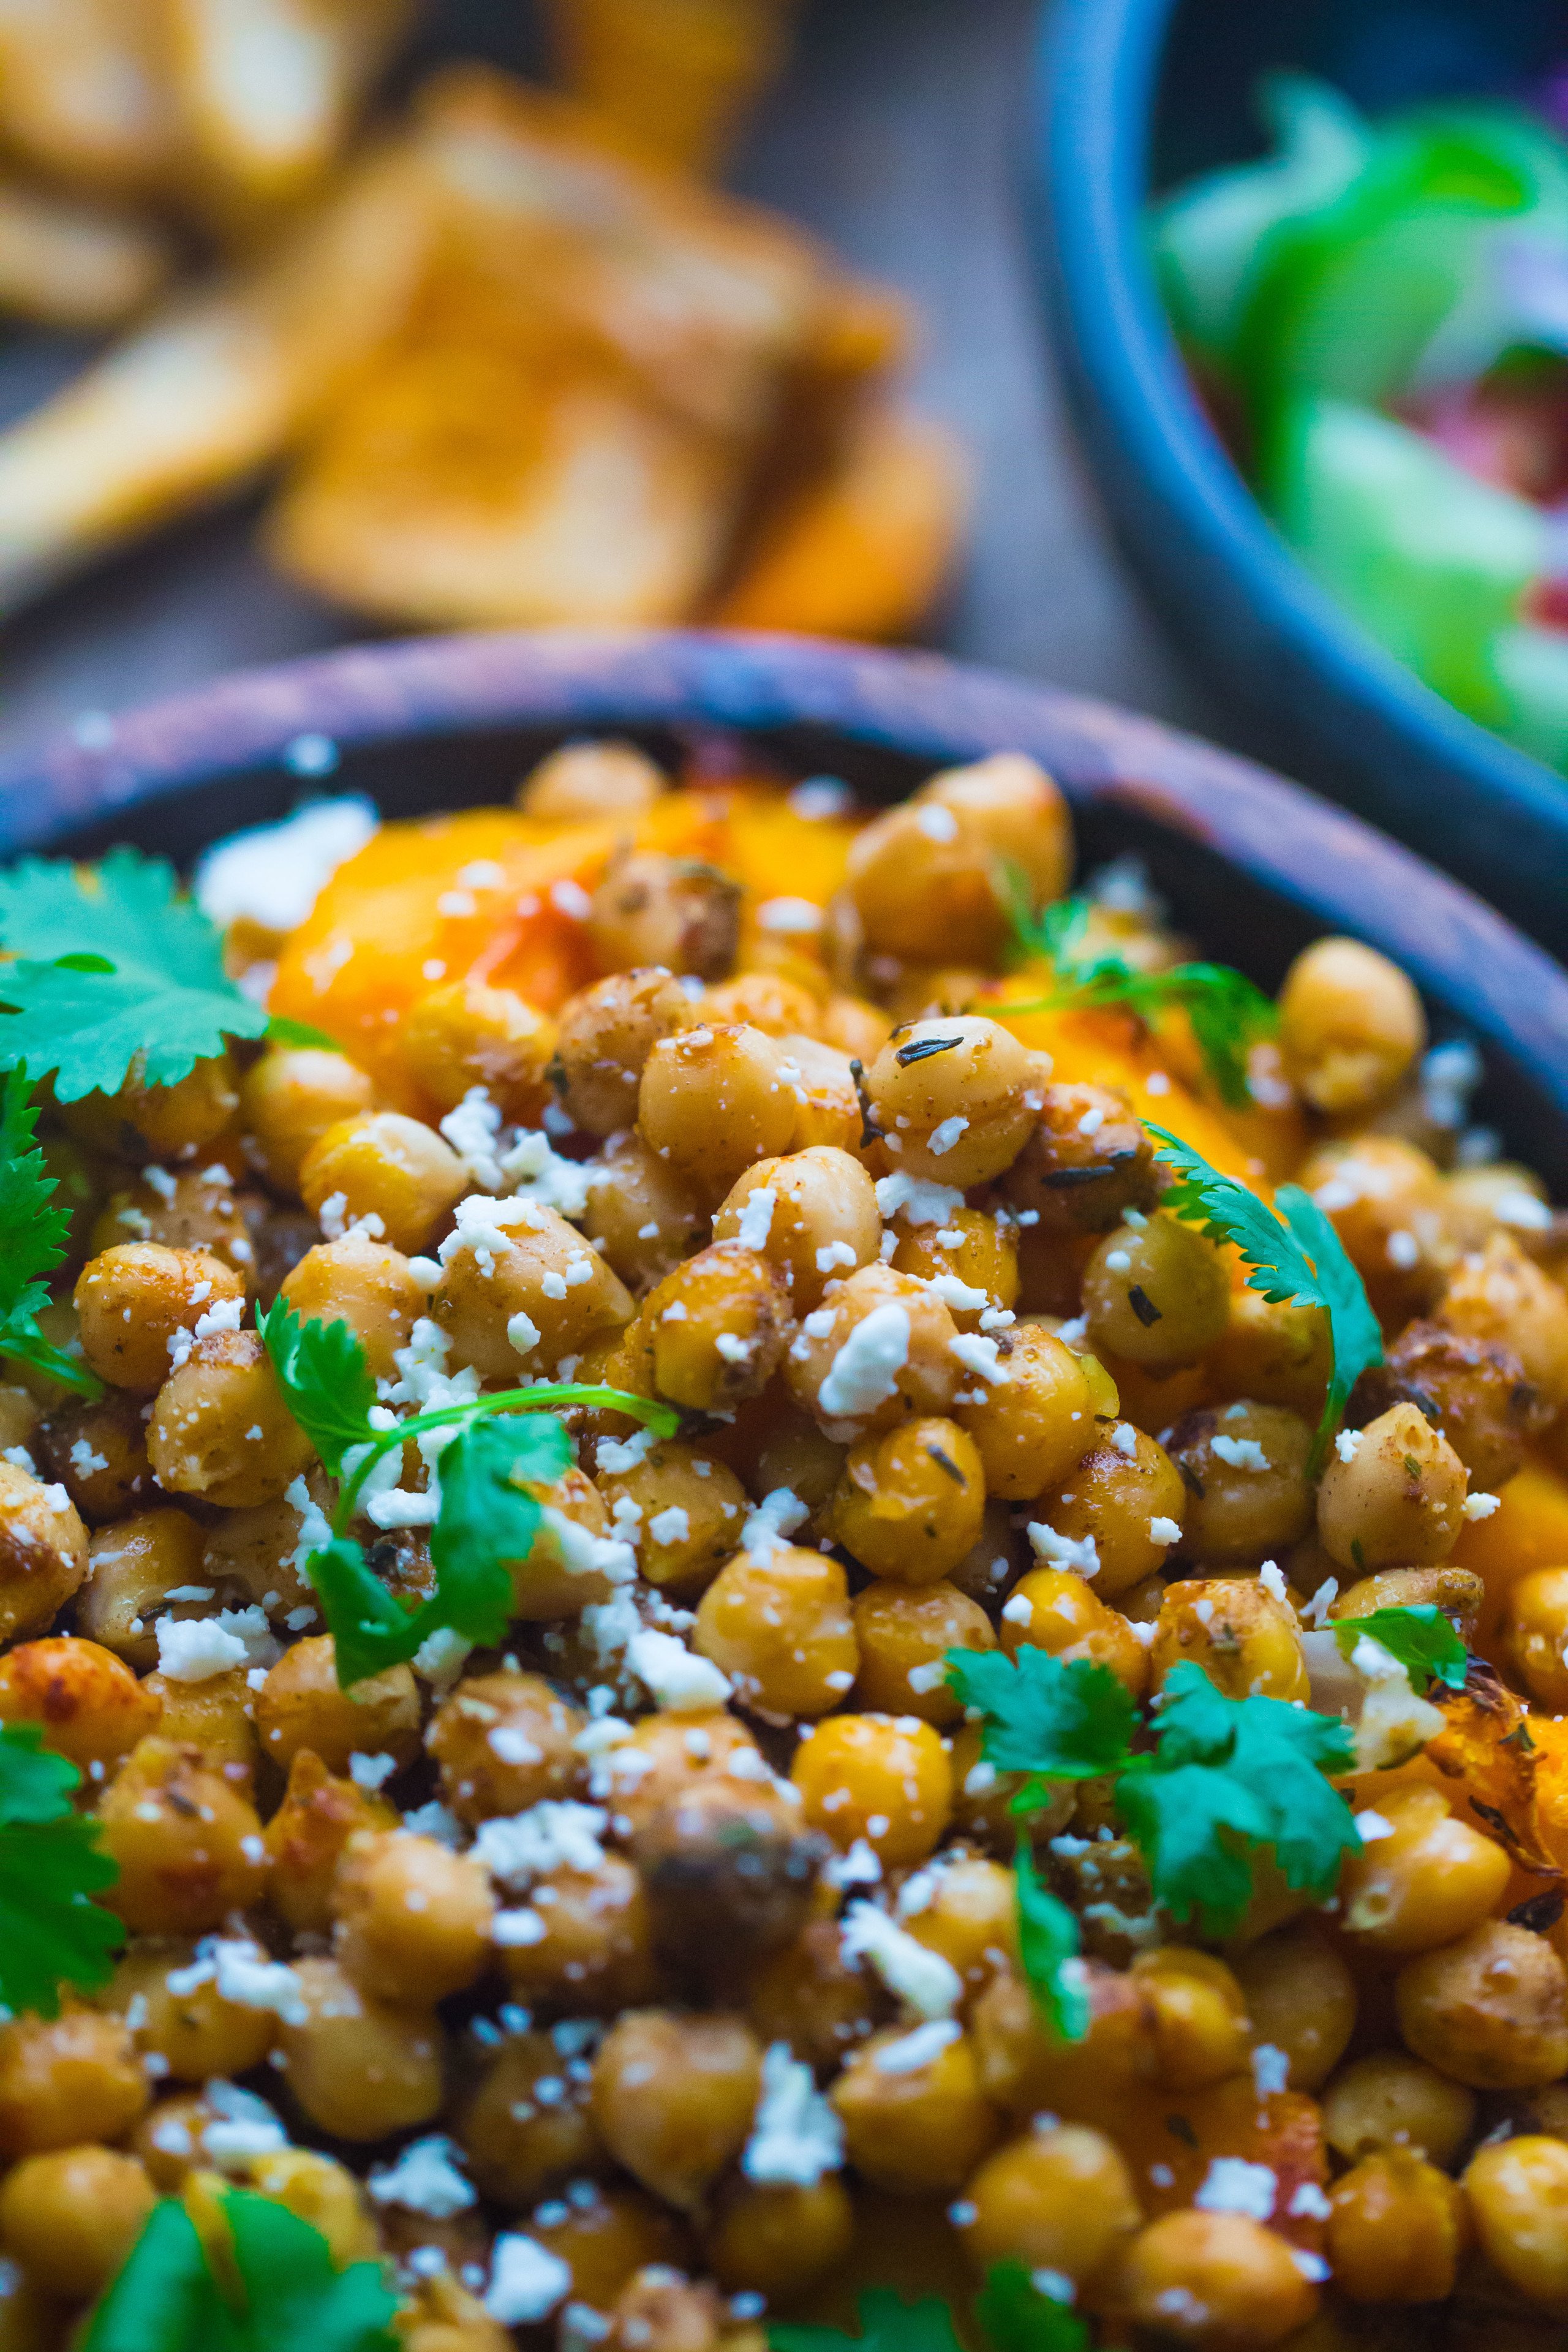 Butternut Squash and Chickpea Salad with feta and coriander in wooden bowl